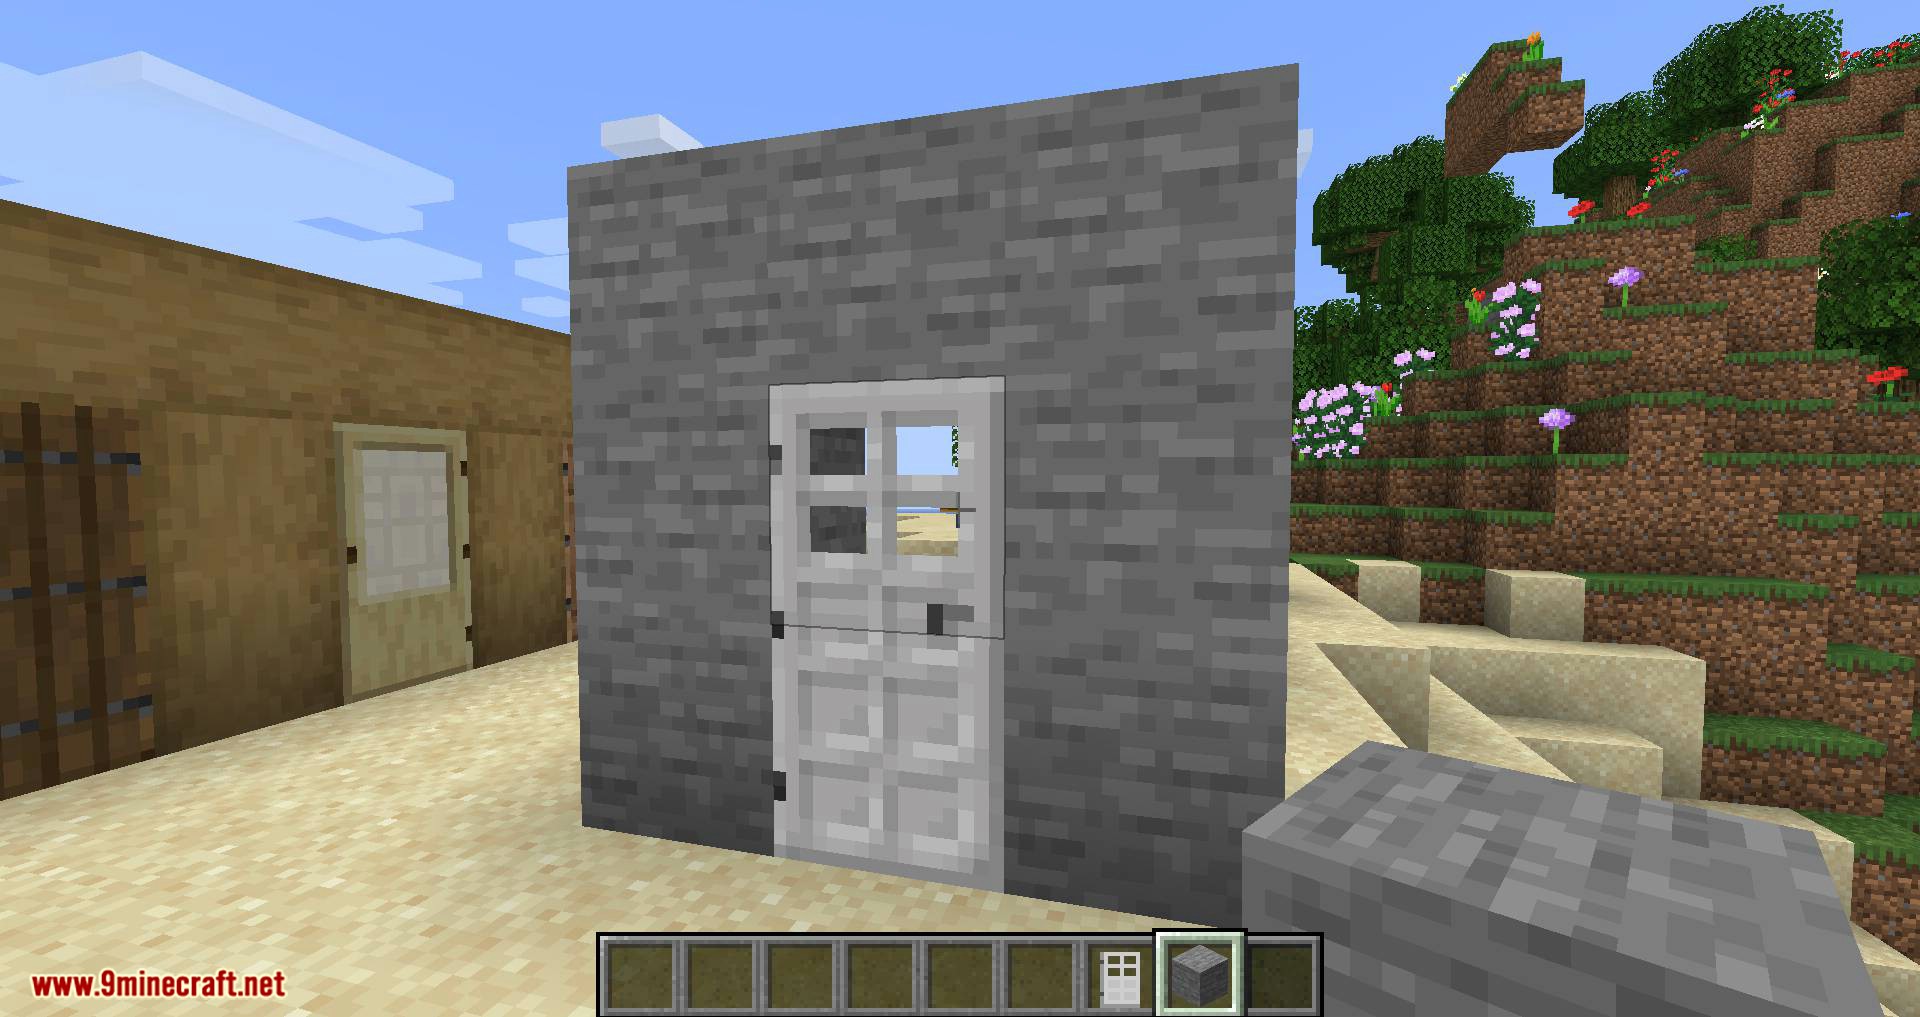 Automatic Door mod for minecraft 08